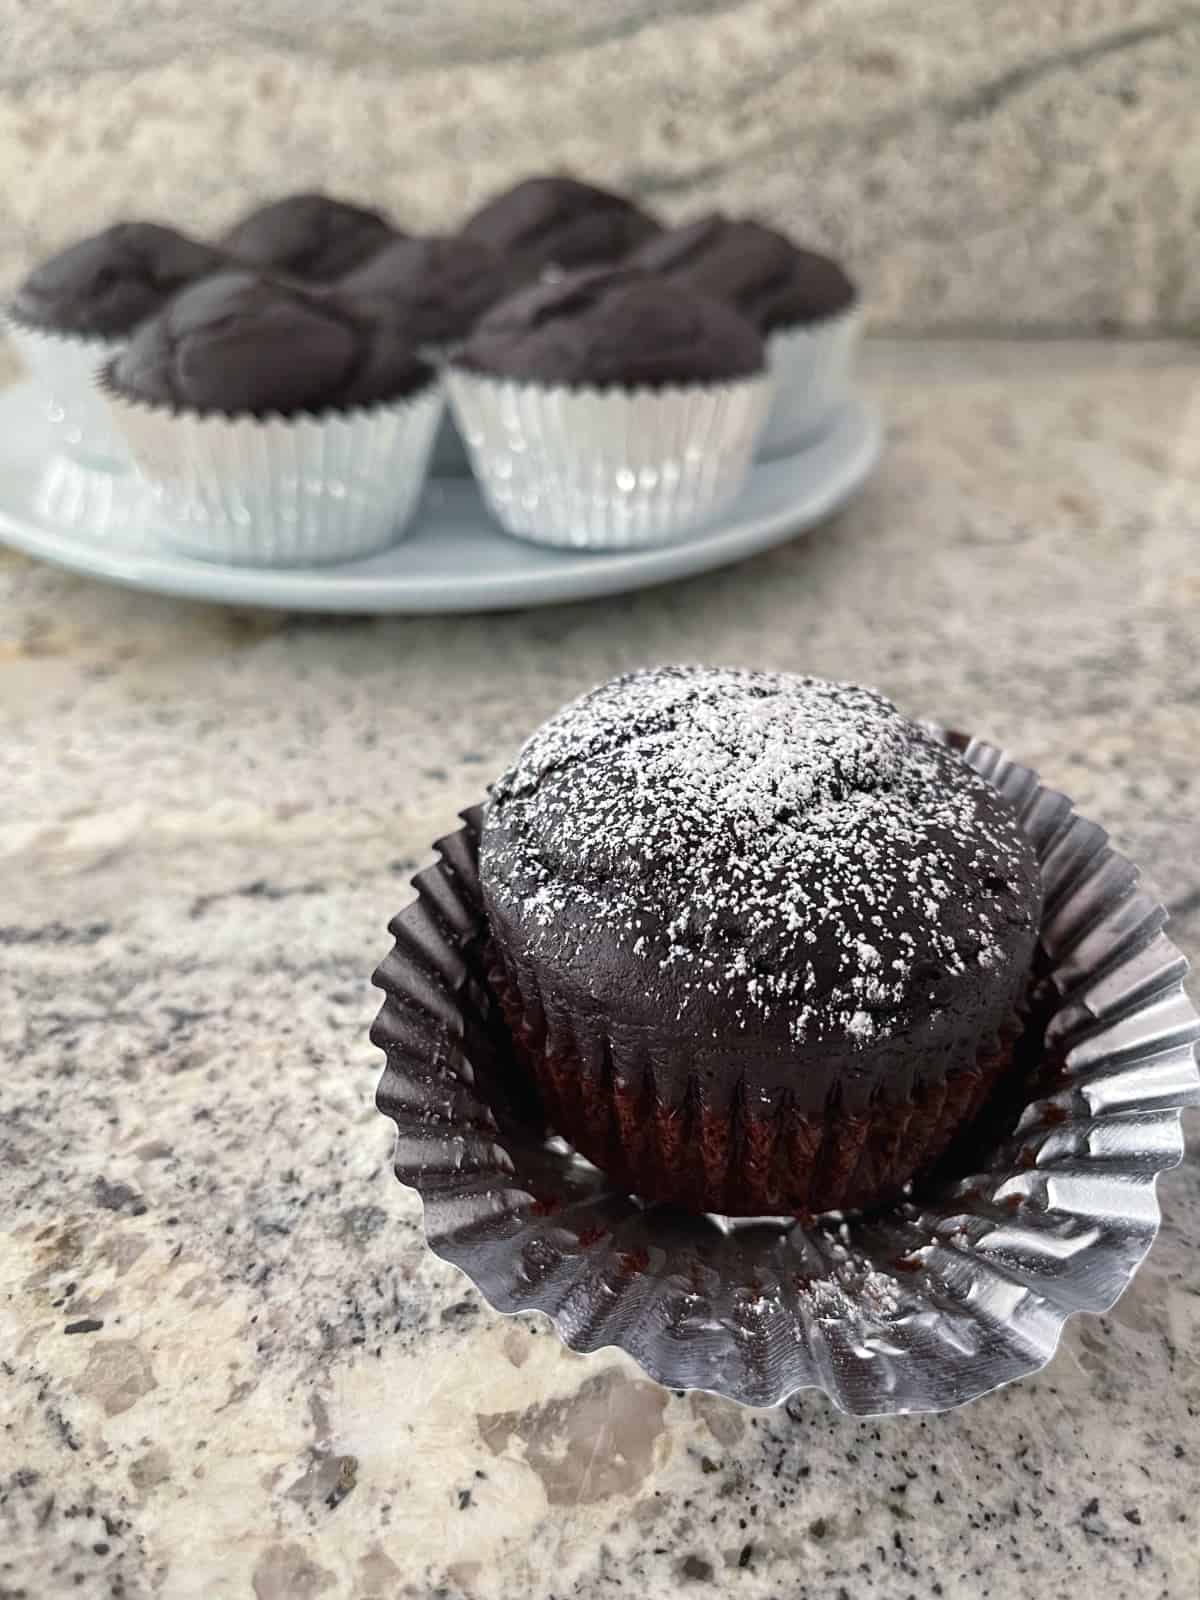 90 calorie chocolate cupcake sprinkled with powdered sugar on granite counter with plate of cupcakes in background.